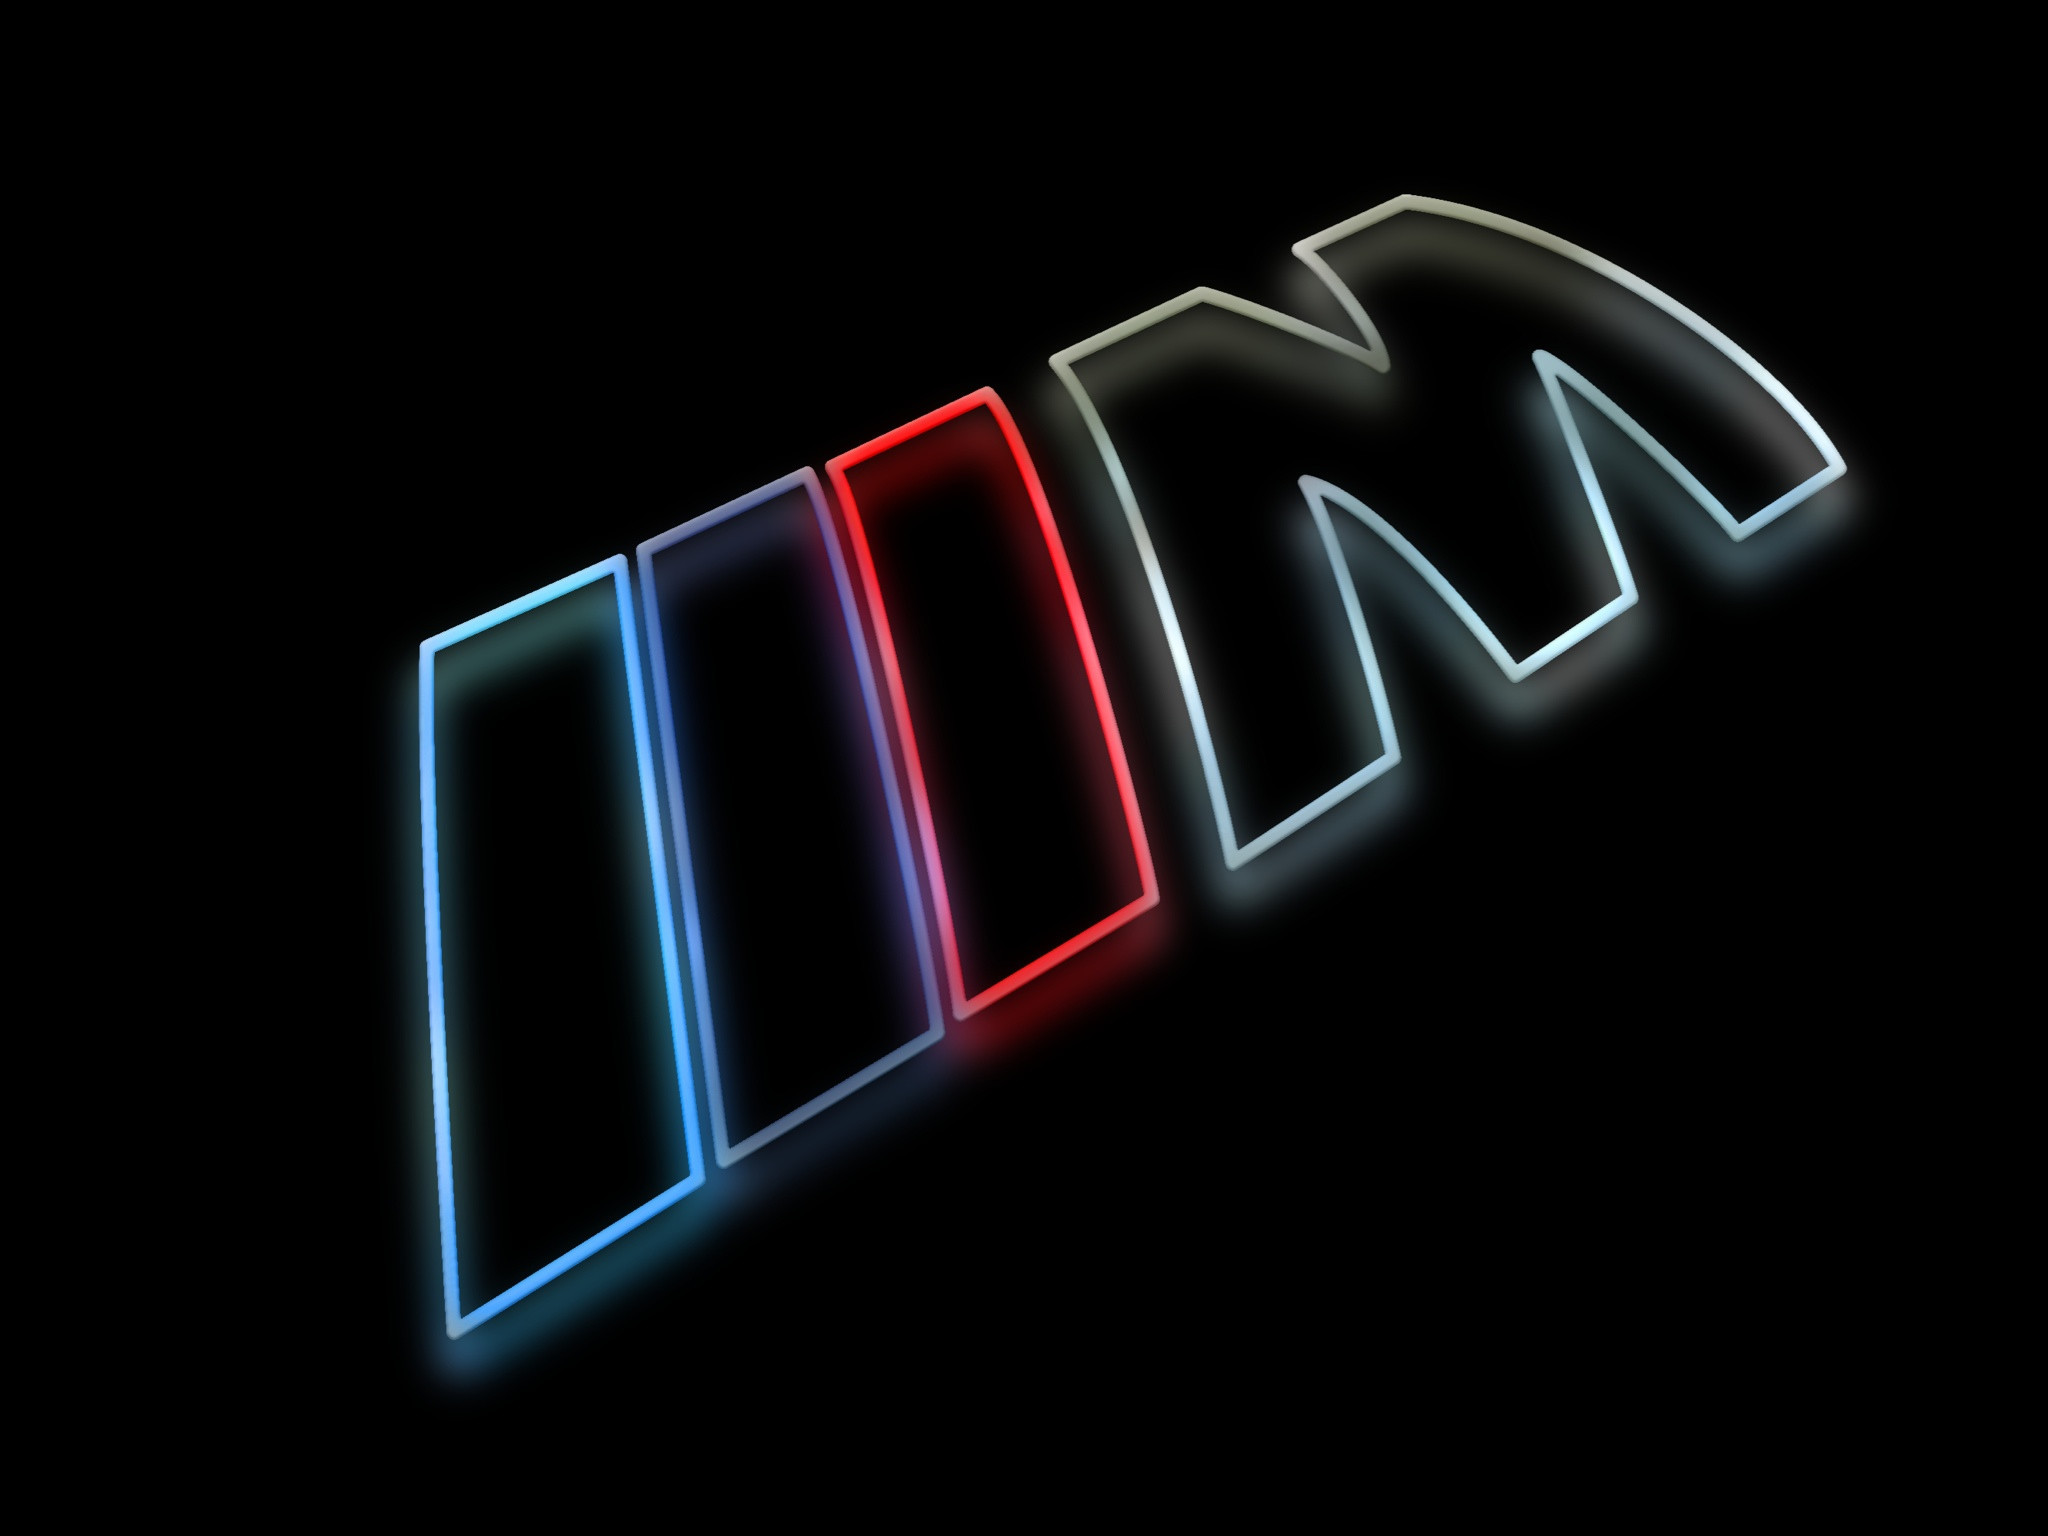 2048x1536 ... Wallpaper 1920x1080  BMW M Logo as a colorful silhouette  rendering with a glow against a shiny black ...